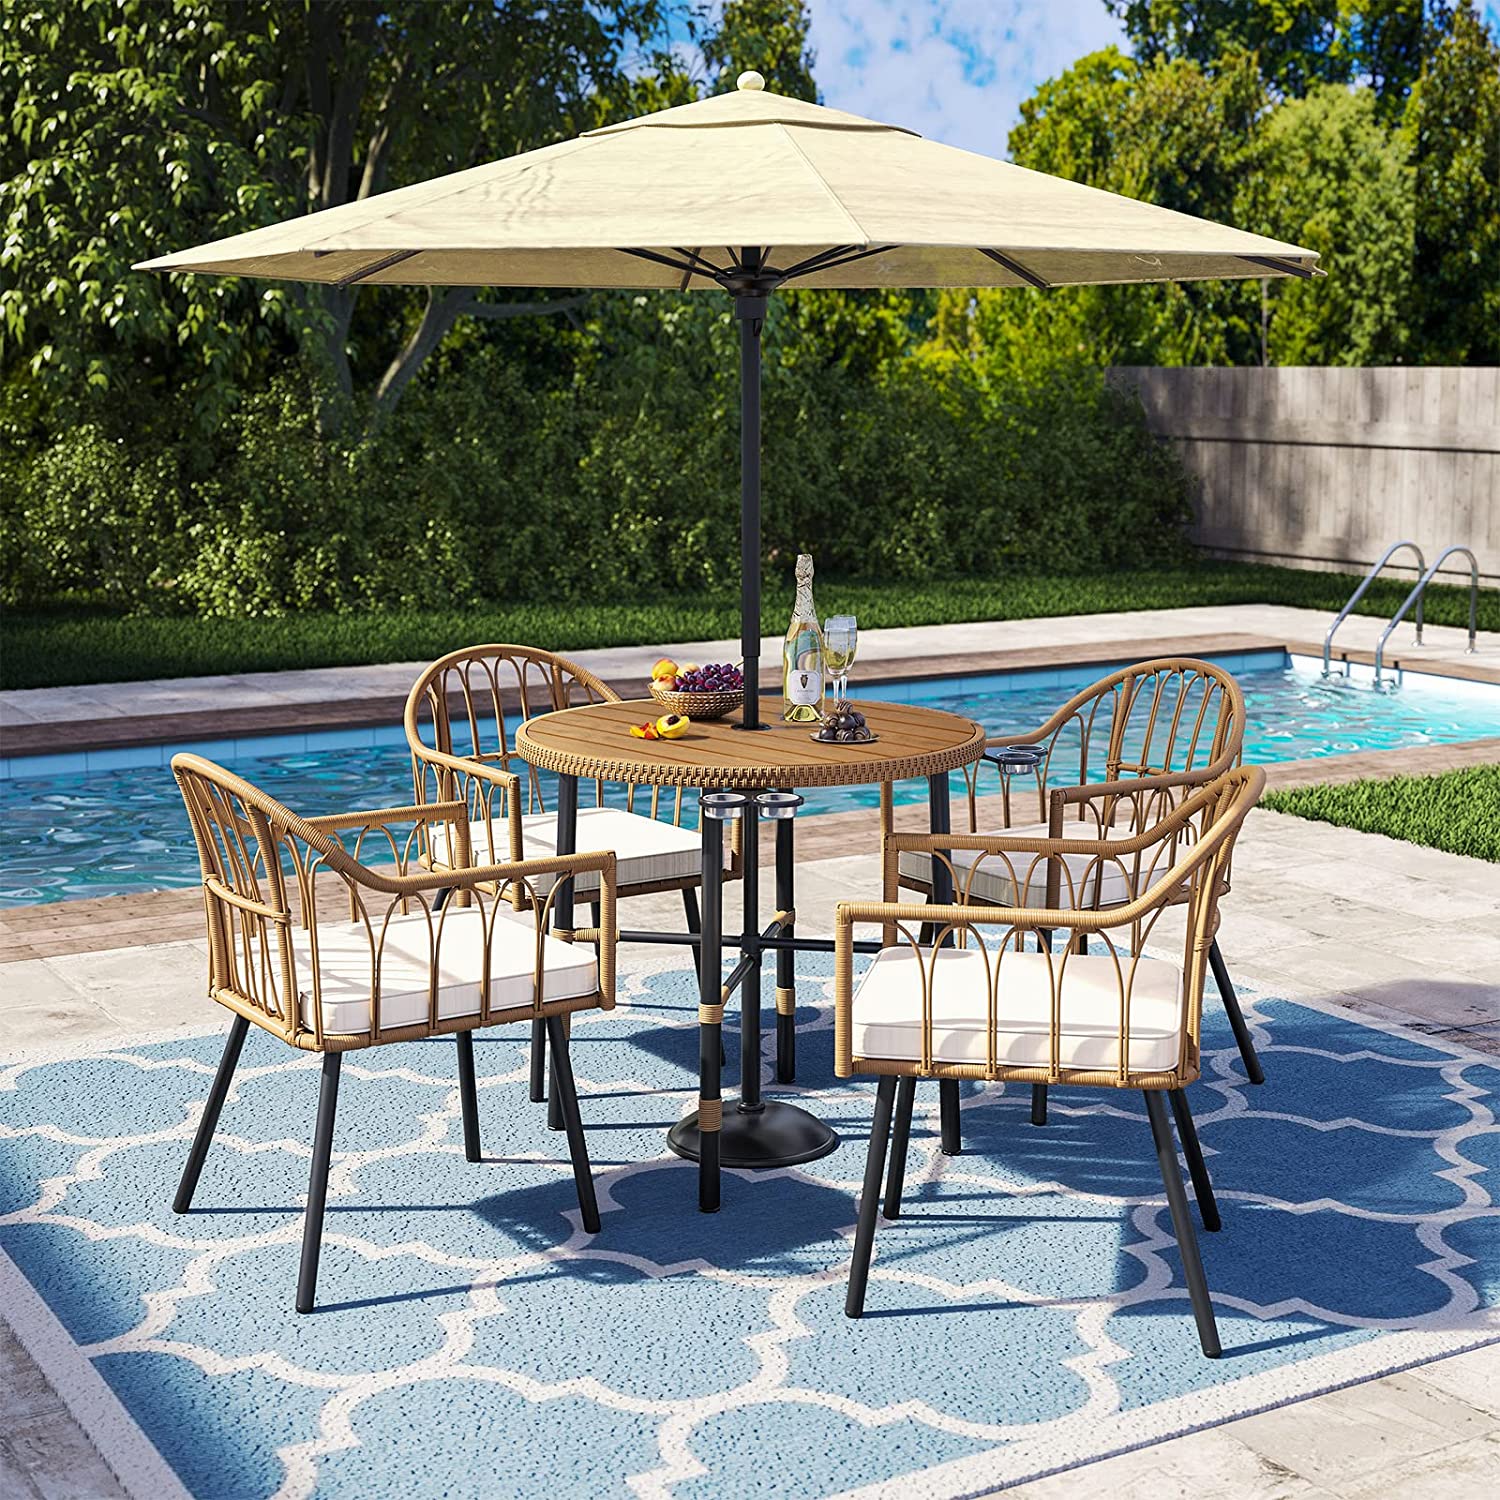 Dextrus 5 pieces Outdoor Patio Dining Table Set, 4 Rattan Wicker Dining Chair and Round Table With Umbrella Hole, Sectional Conversation Set for Backyard, Balcony, Garden, Lawn - image 1 of 9